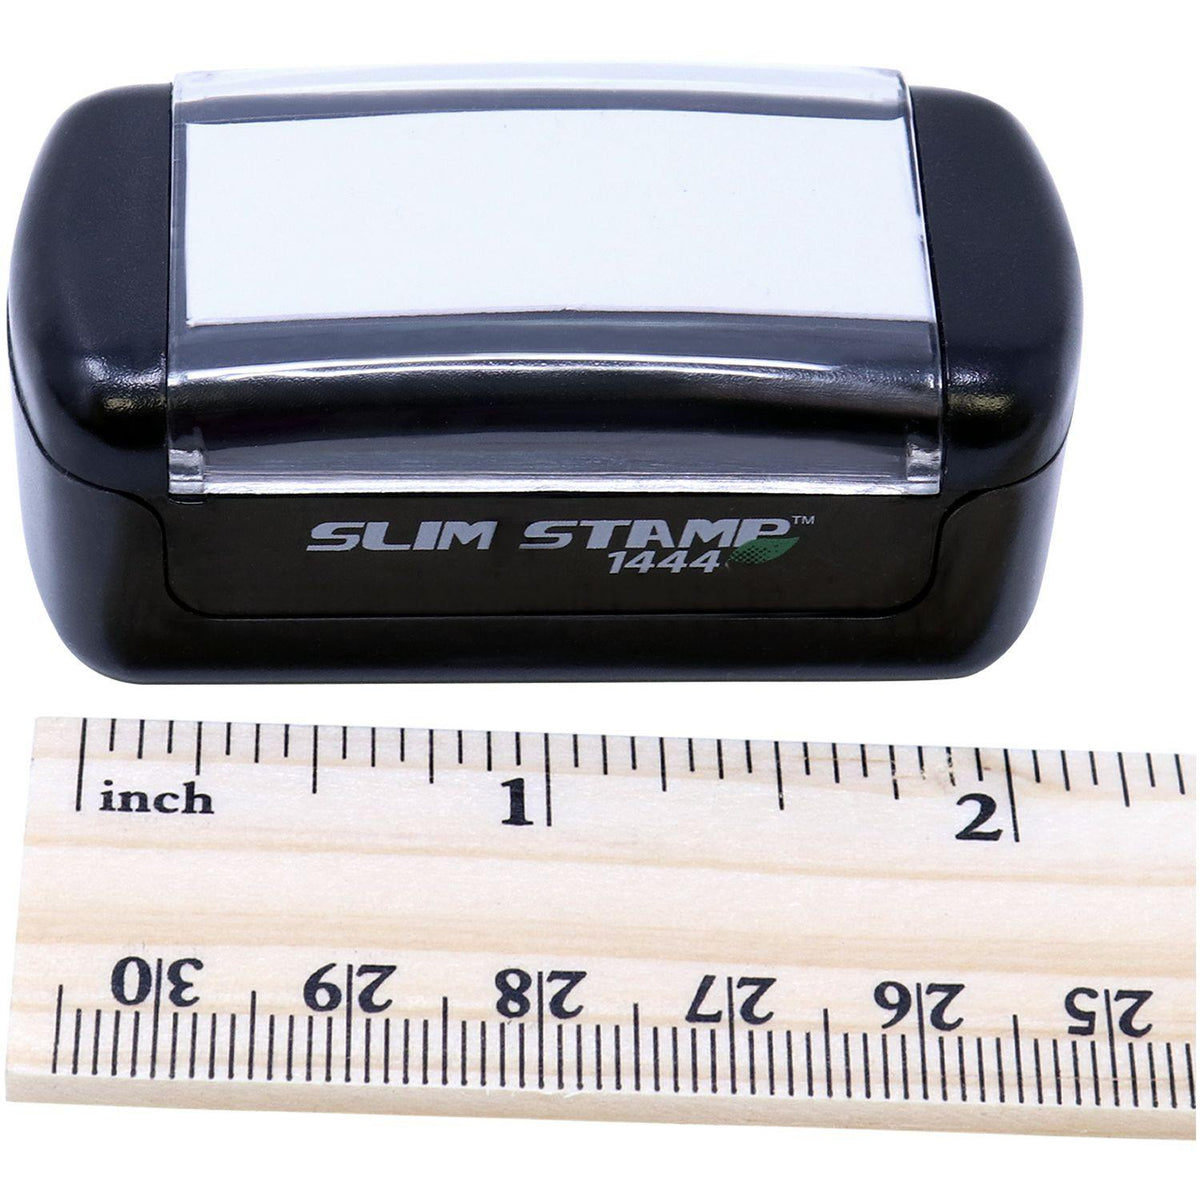 Measurement Slim Pre-Inked Package Services Stamp with Ruler